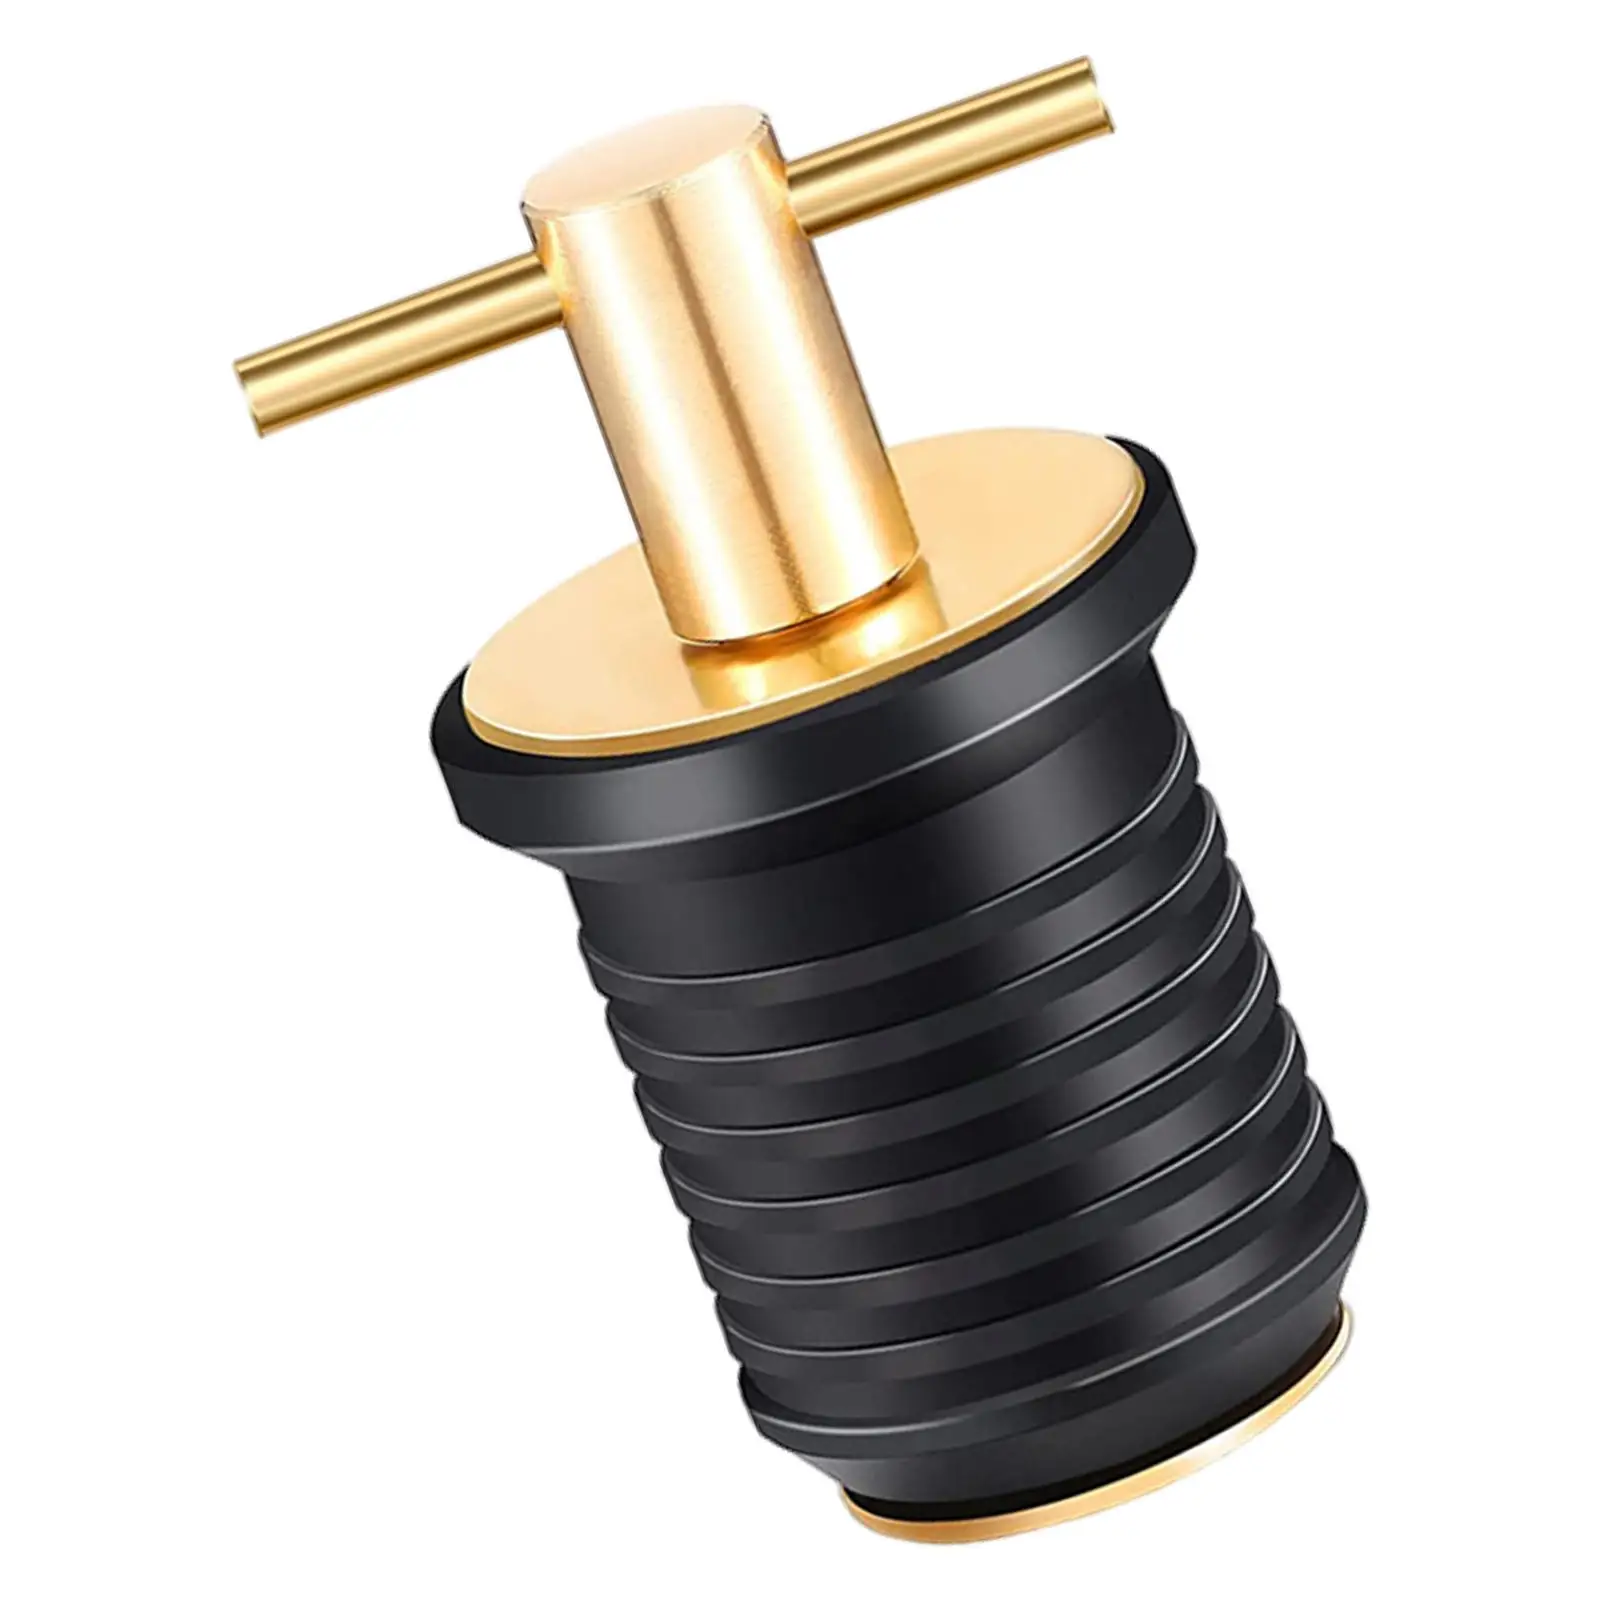 Boat Drain Plug 3/4` or 1-1/4` Adjustable Rubber Deck Drain Plug for 19mm 32mm Hole Speedboat Boating Canoe Water Sports